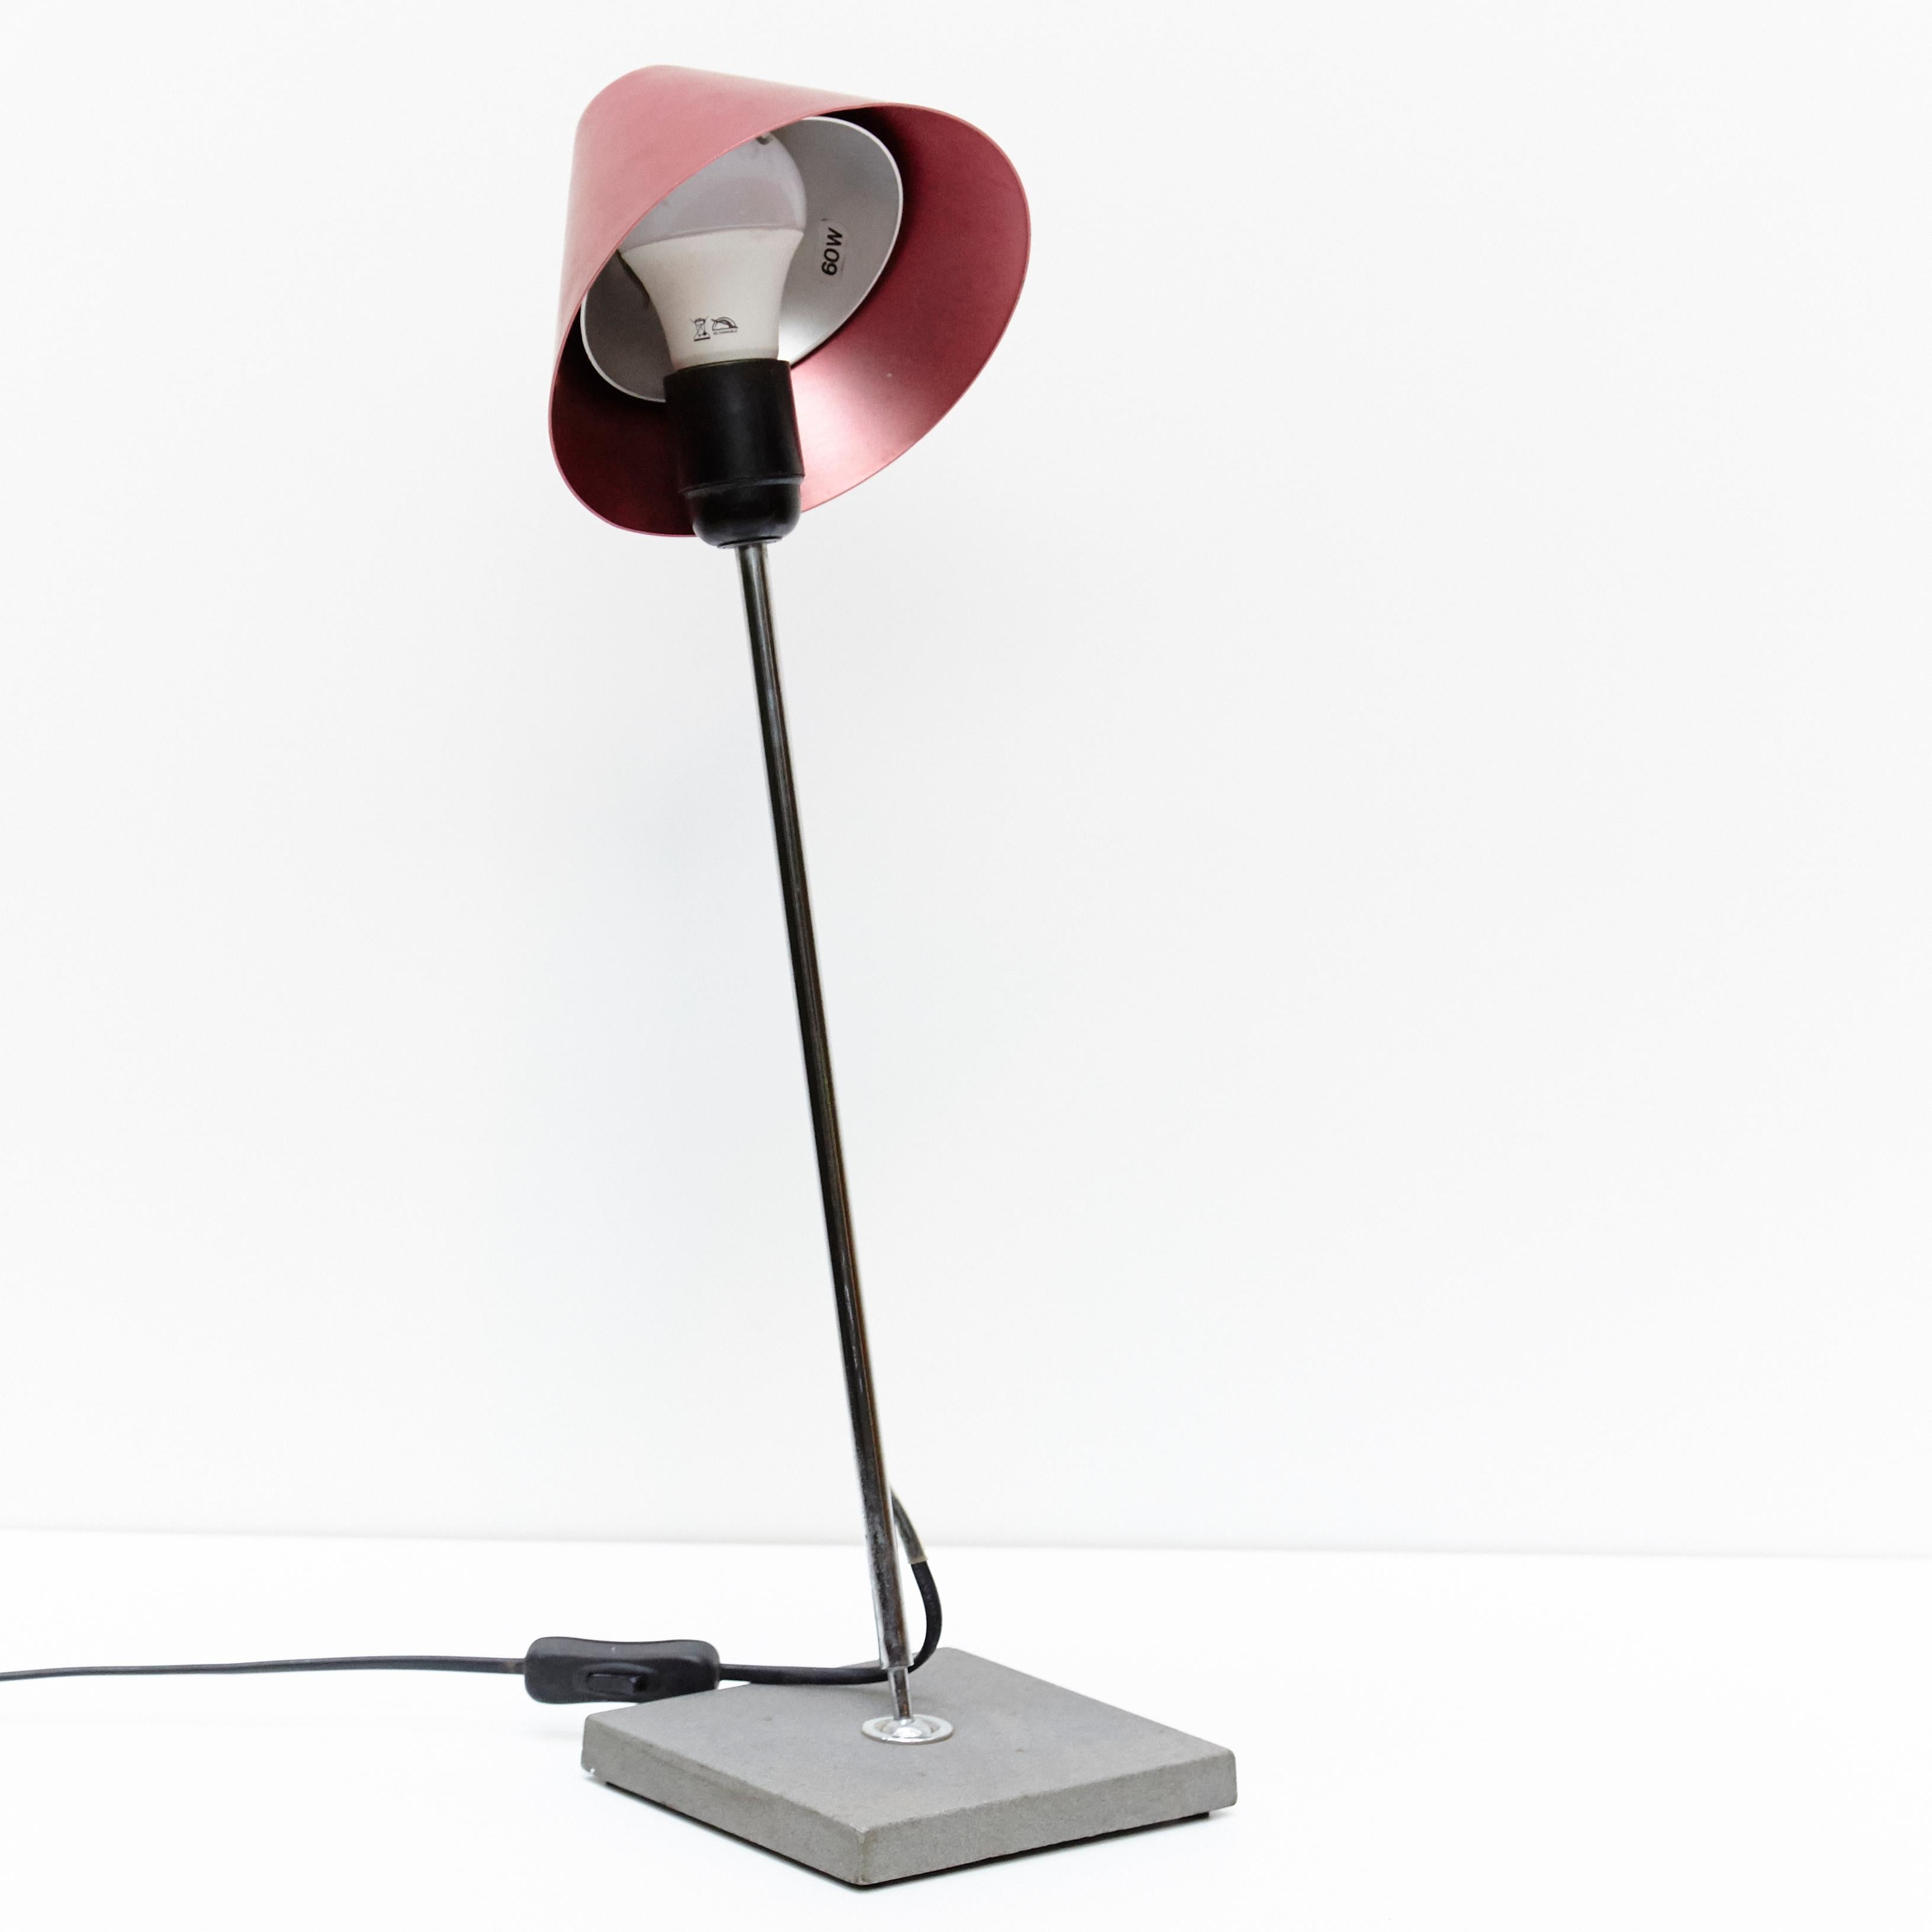 Late 20th Century Lamp Designed by Mobles 114, Barcelona, 1978